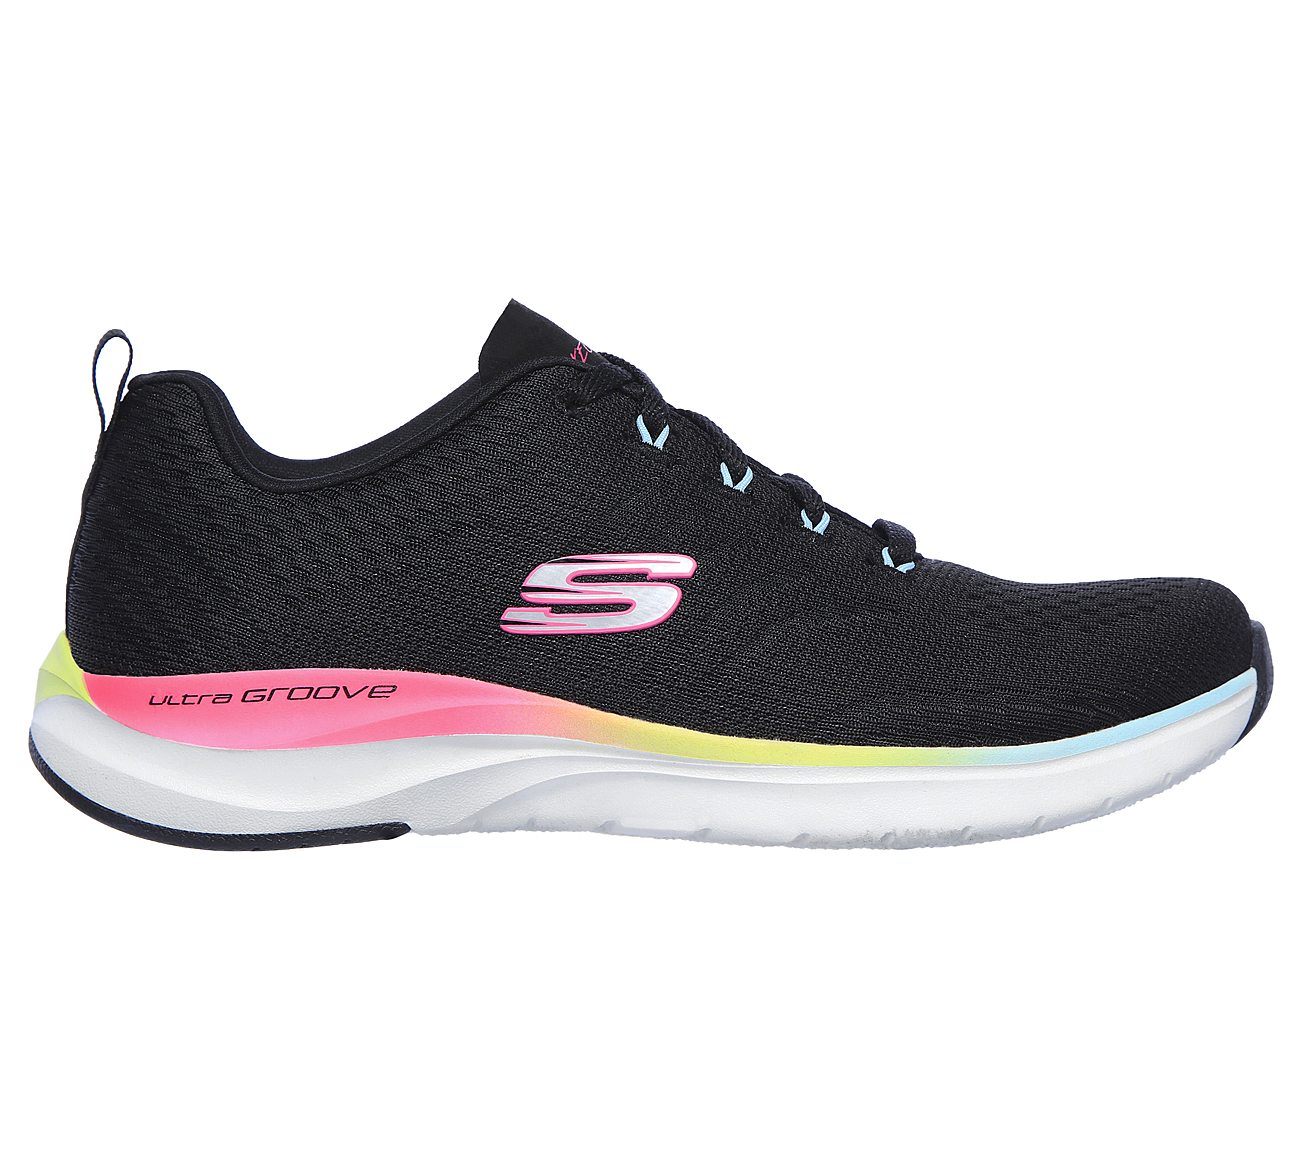 Buy SKECHERS Ultra Groove - Pure Vision Sport Shoes